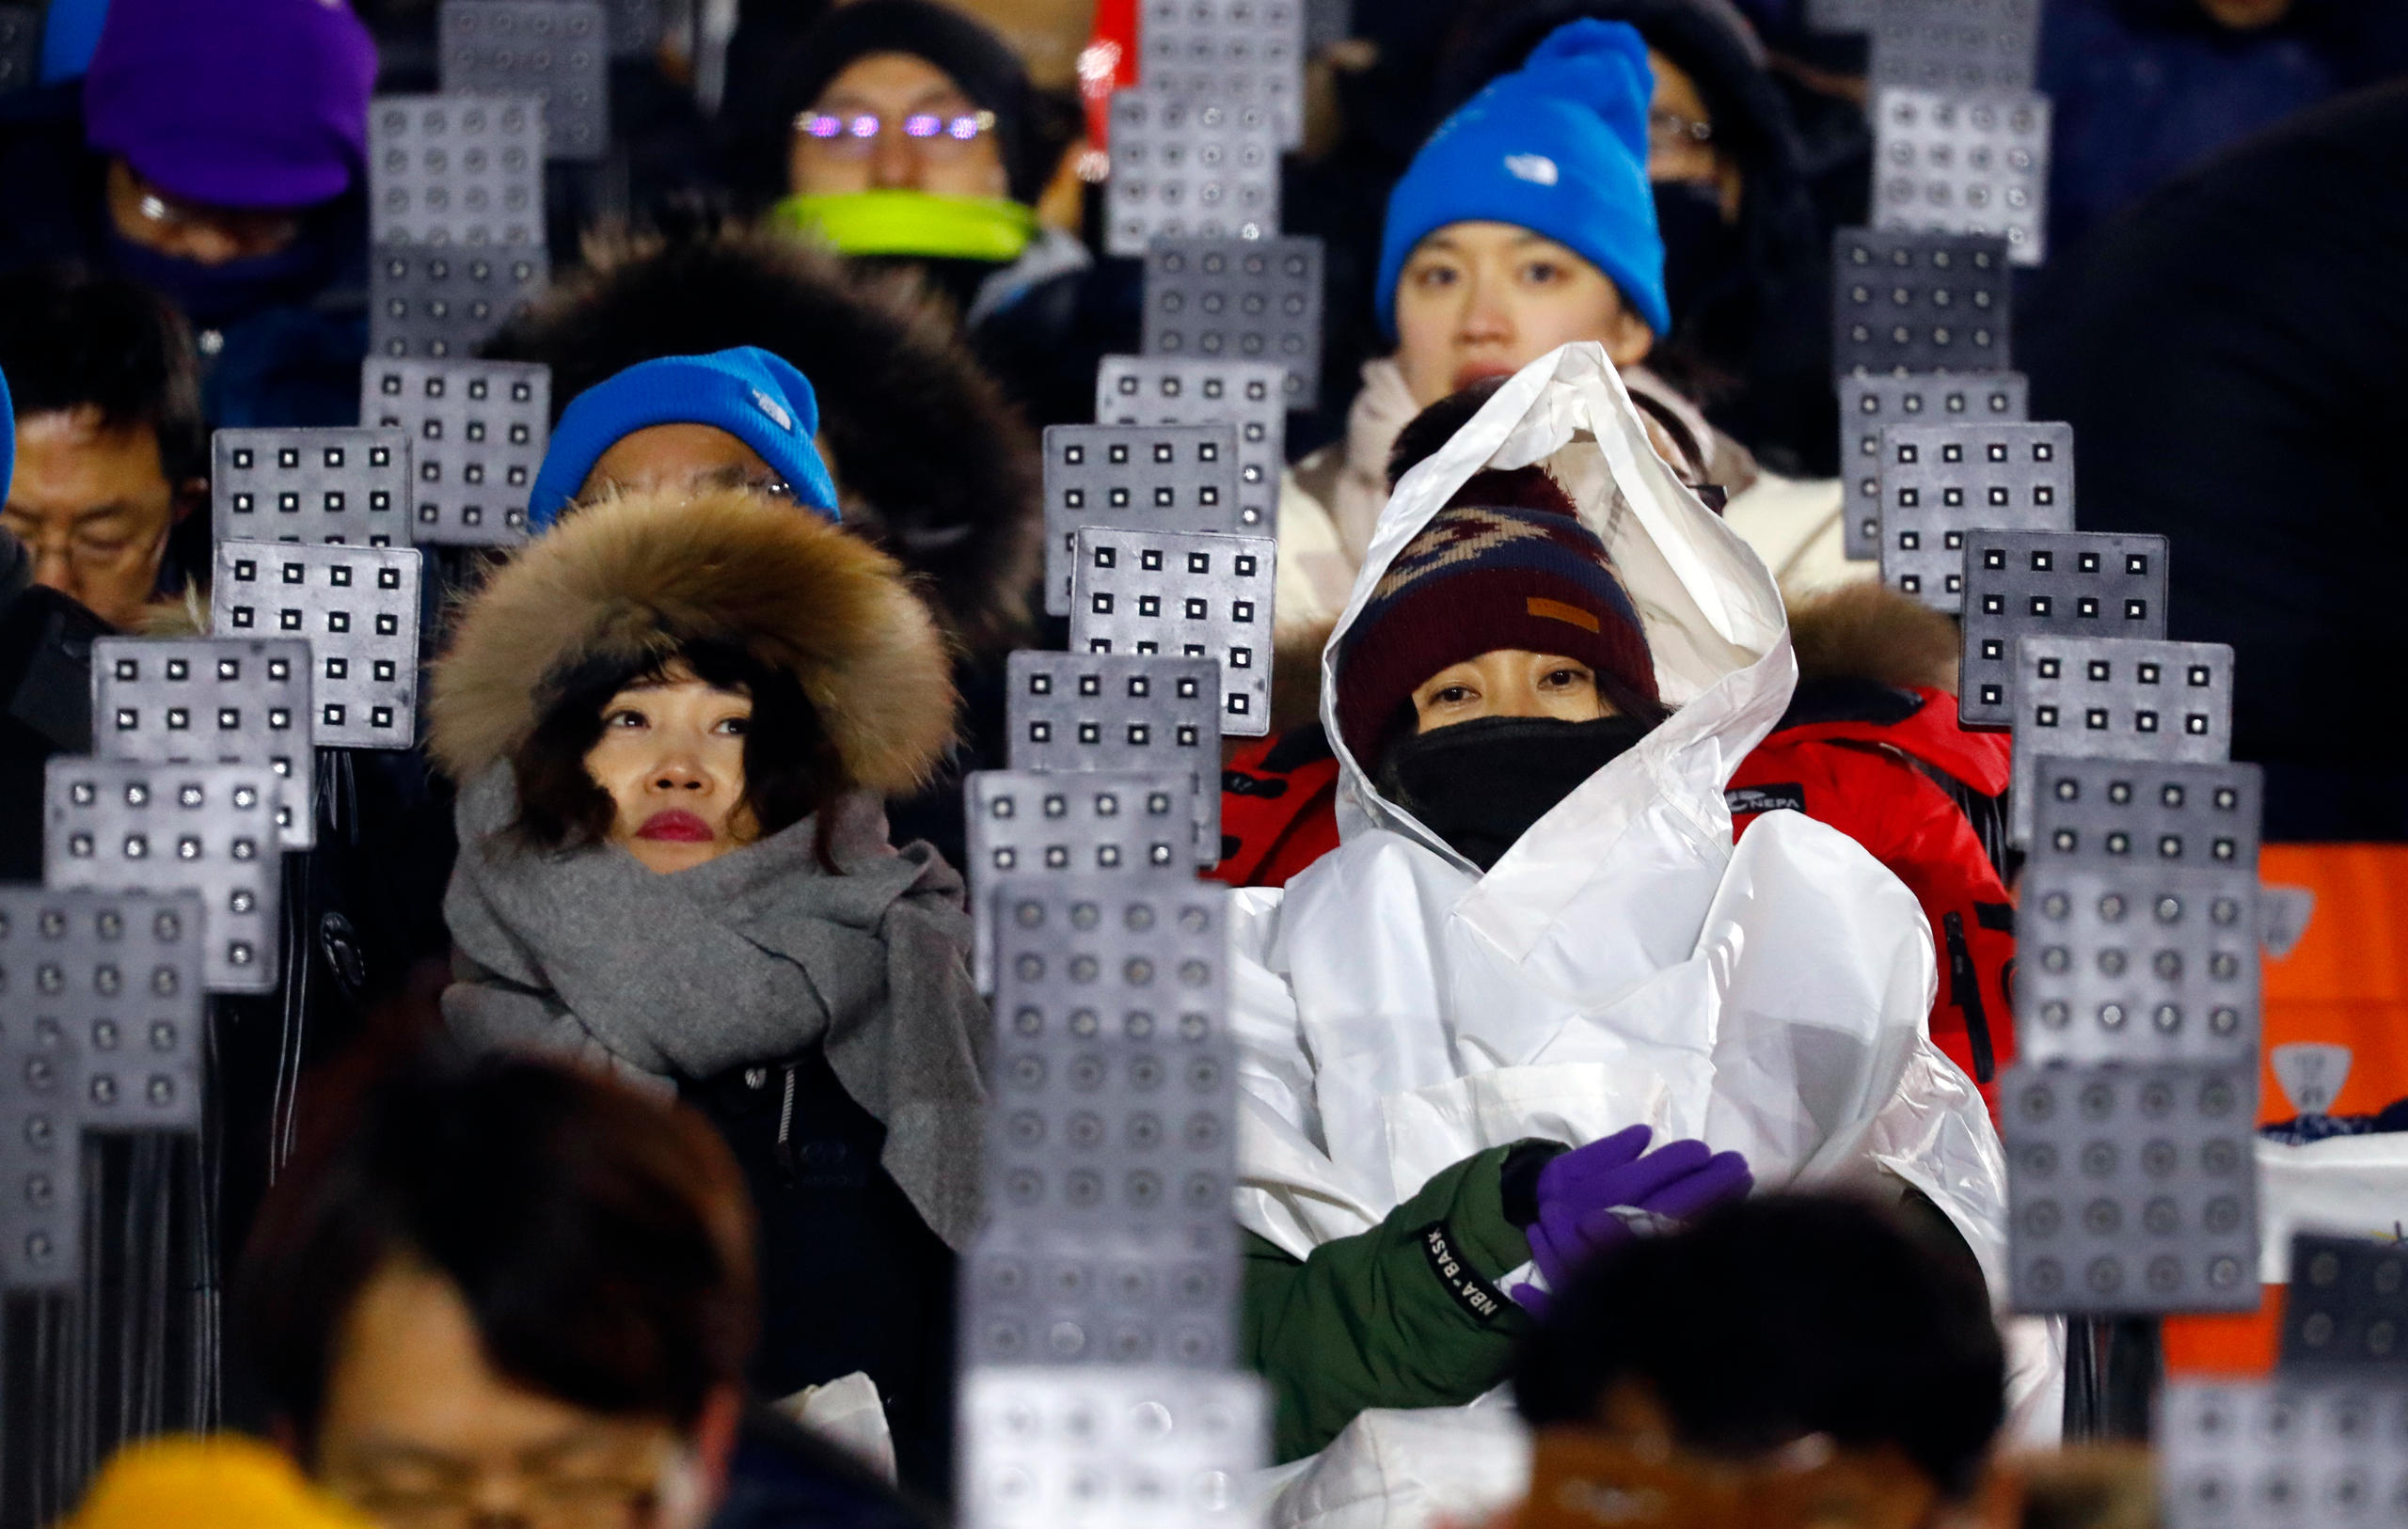 Cold spectators in PyeongChang